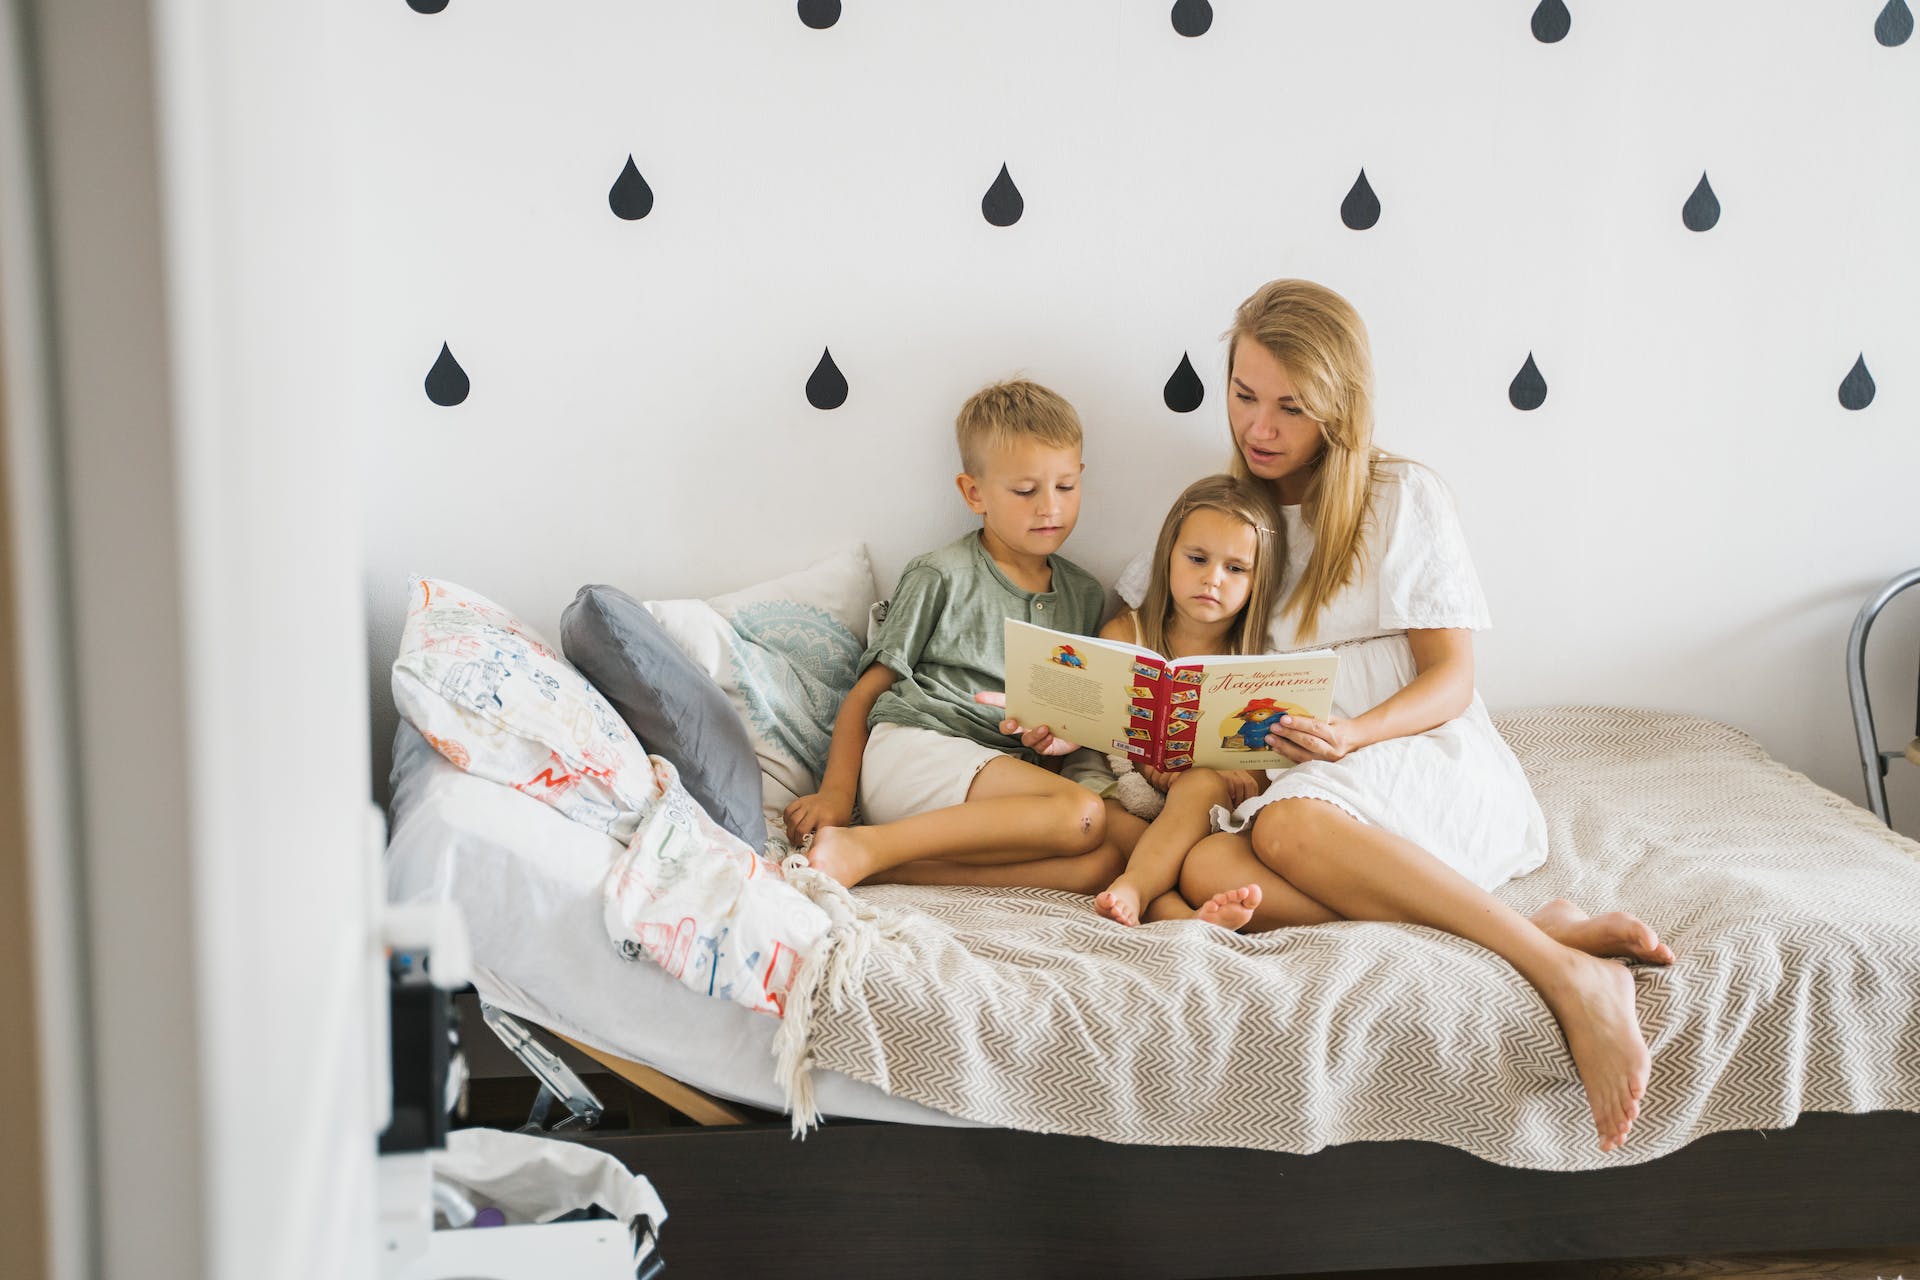 A mother reading a story to her kids | Source: Pexels